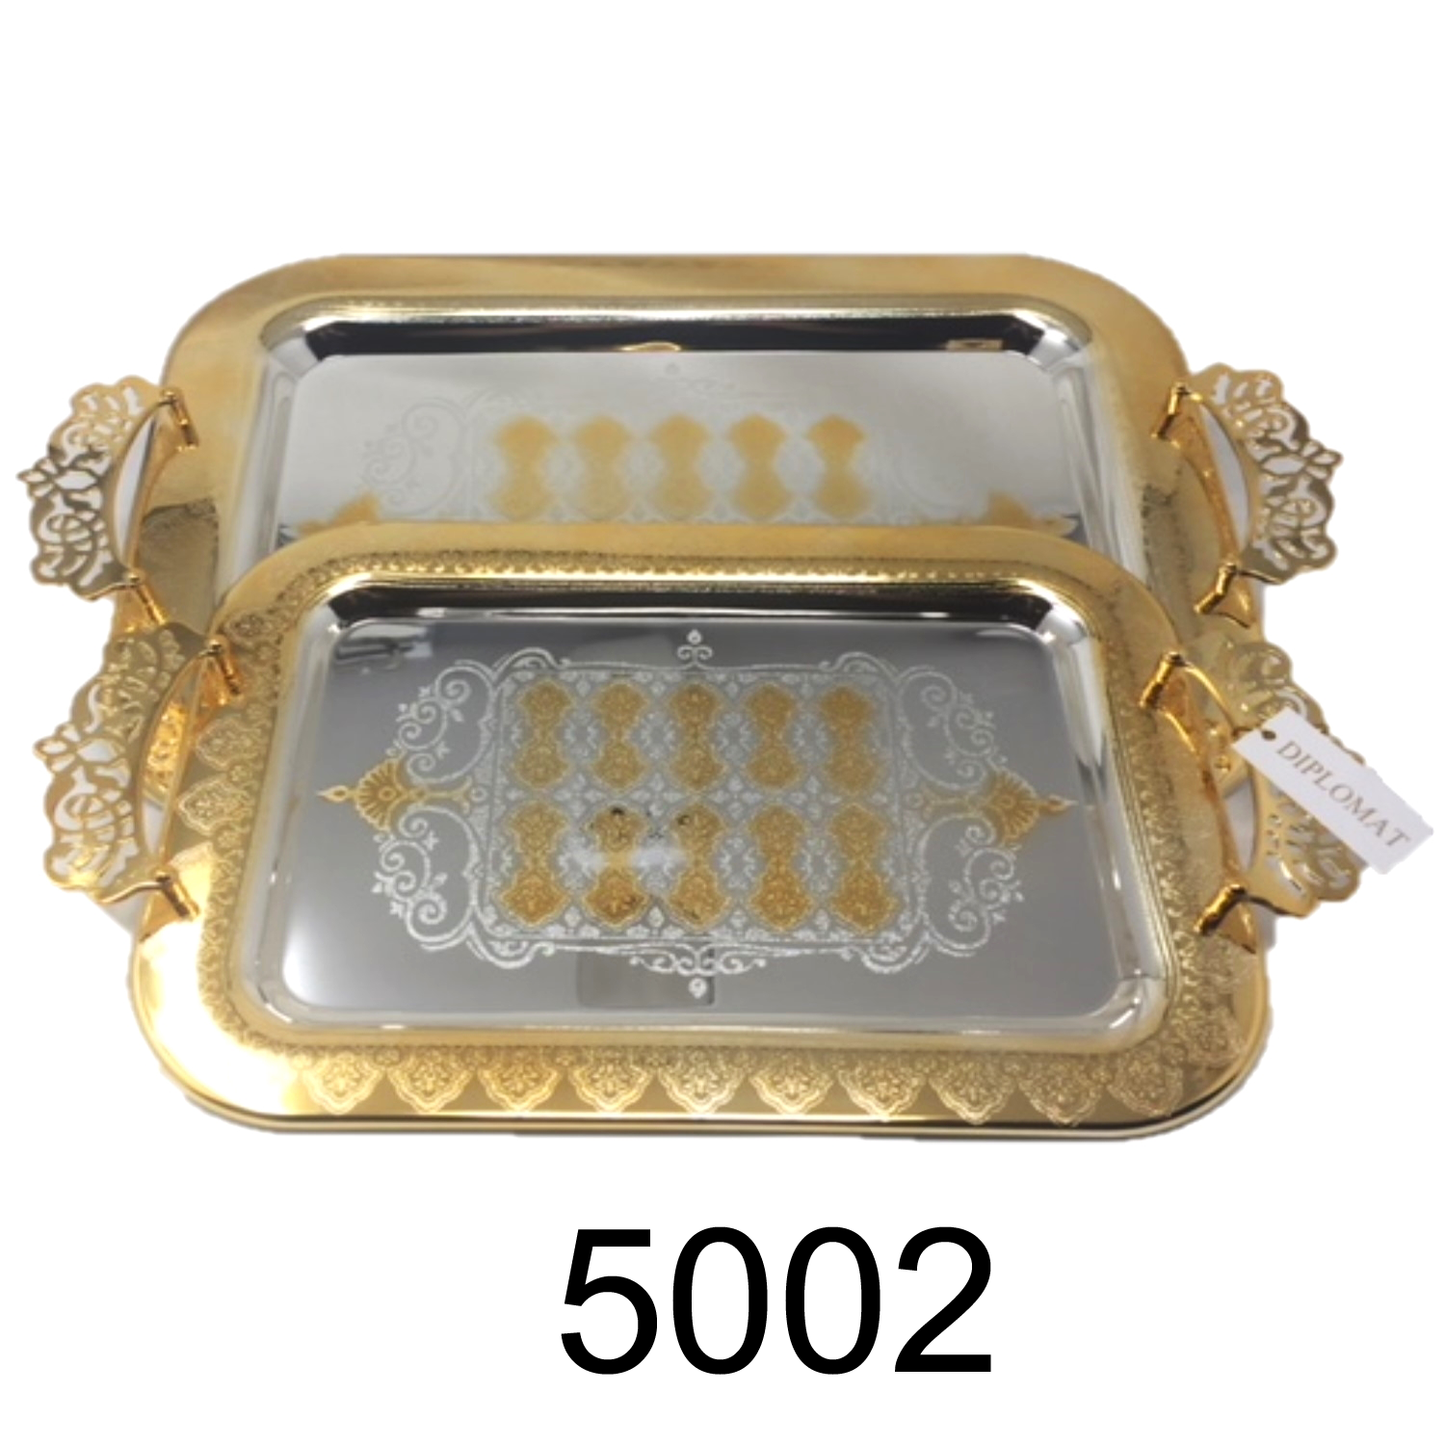 2 PC Serving Tea Tray Set Gold Handle and Accents Chrome Plated